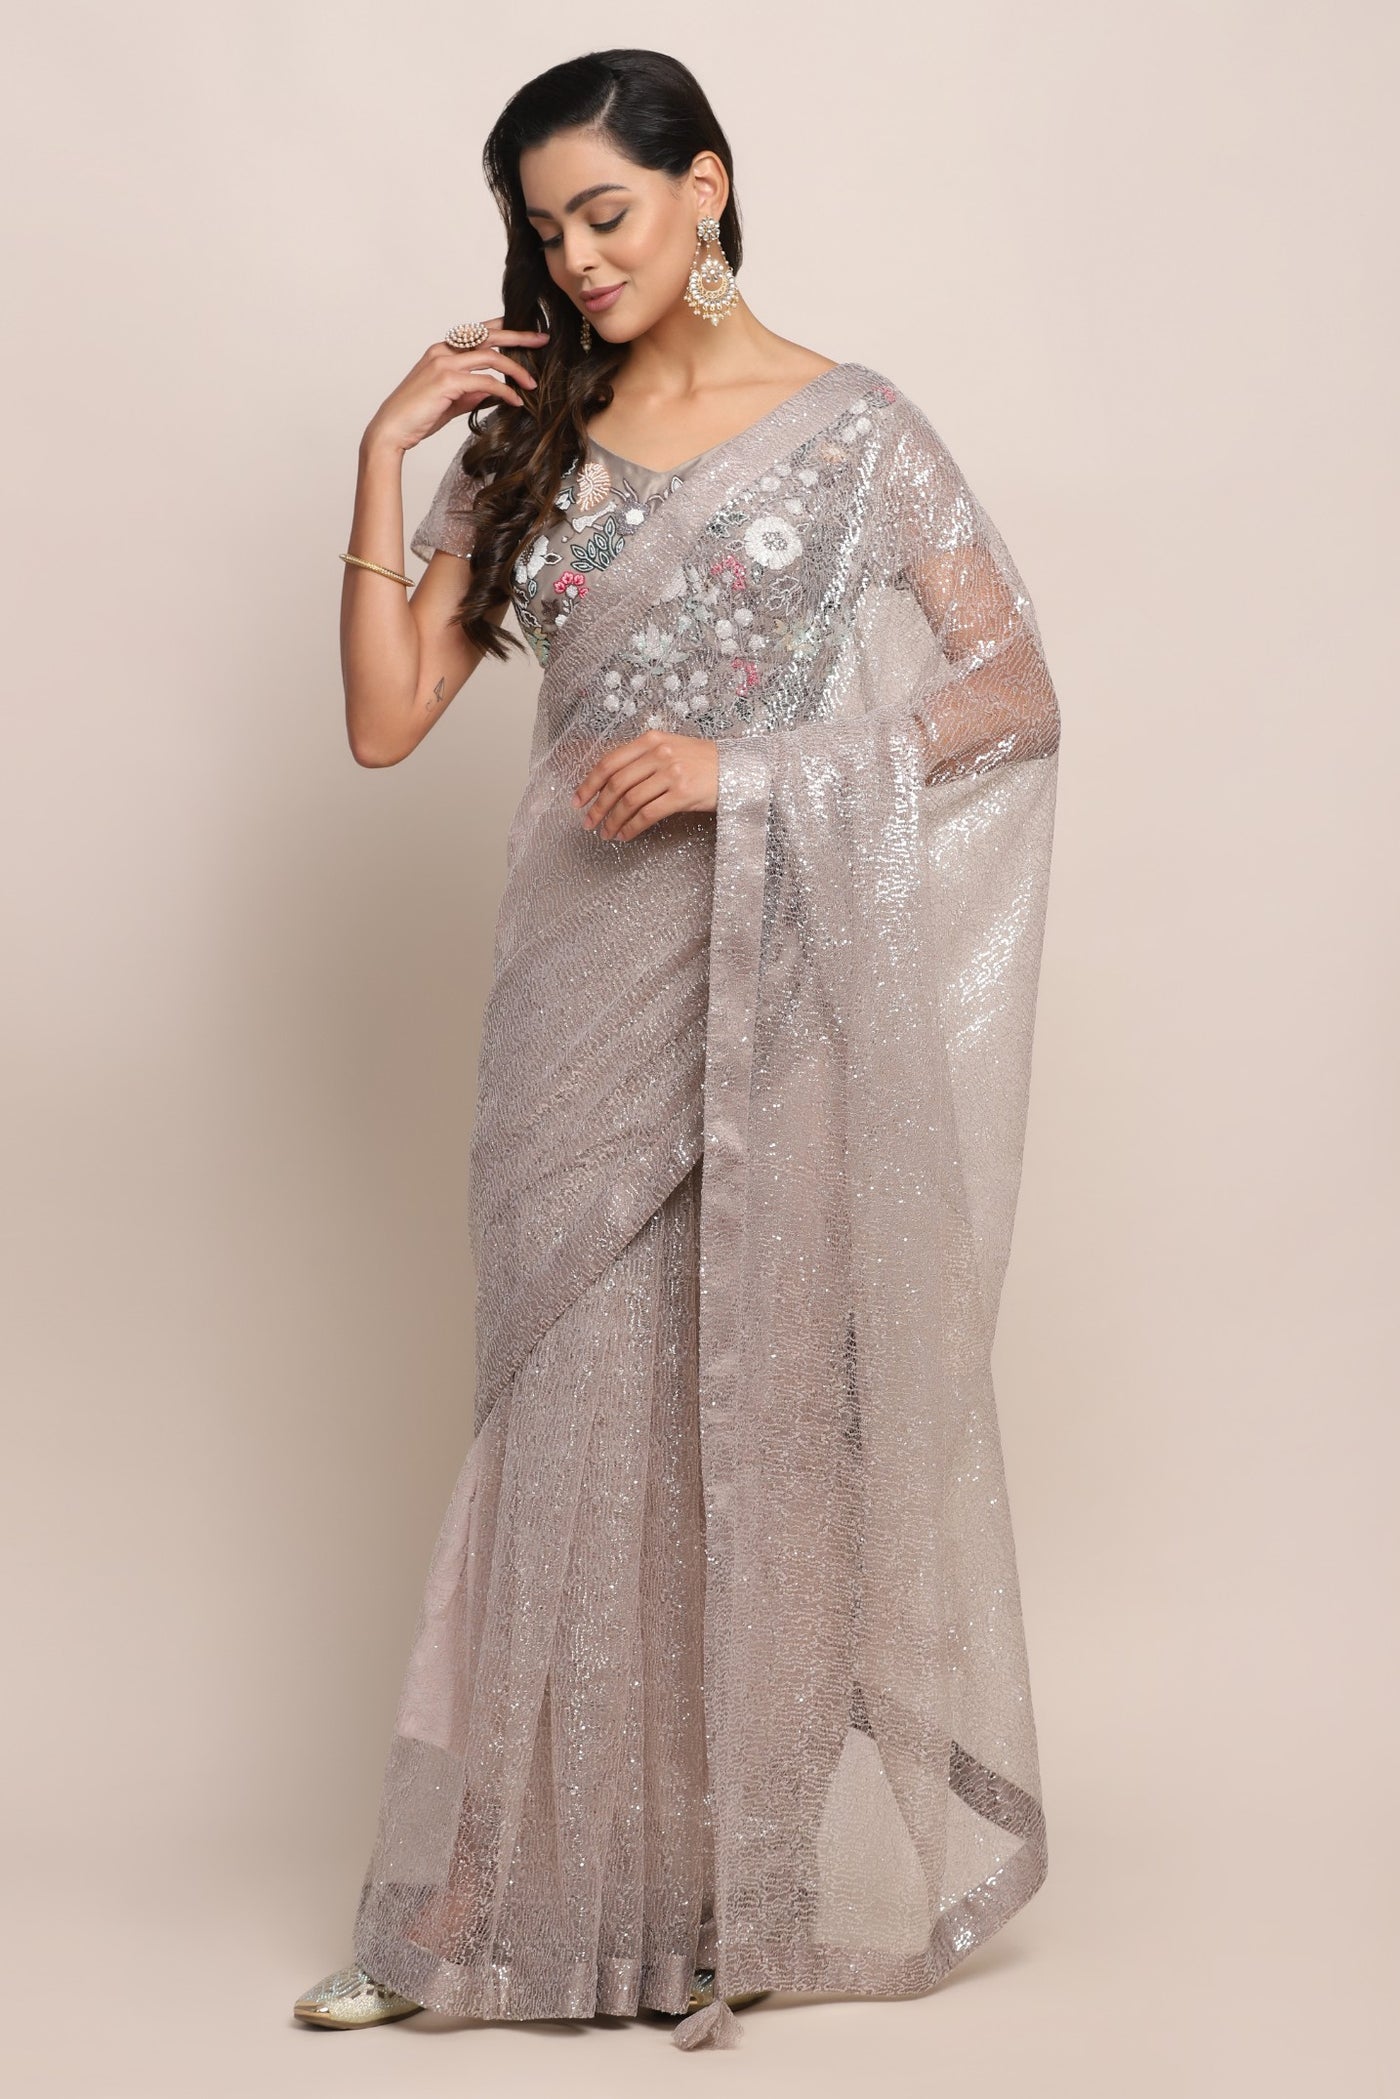 Stylish grey color floral motif embroidered saree